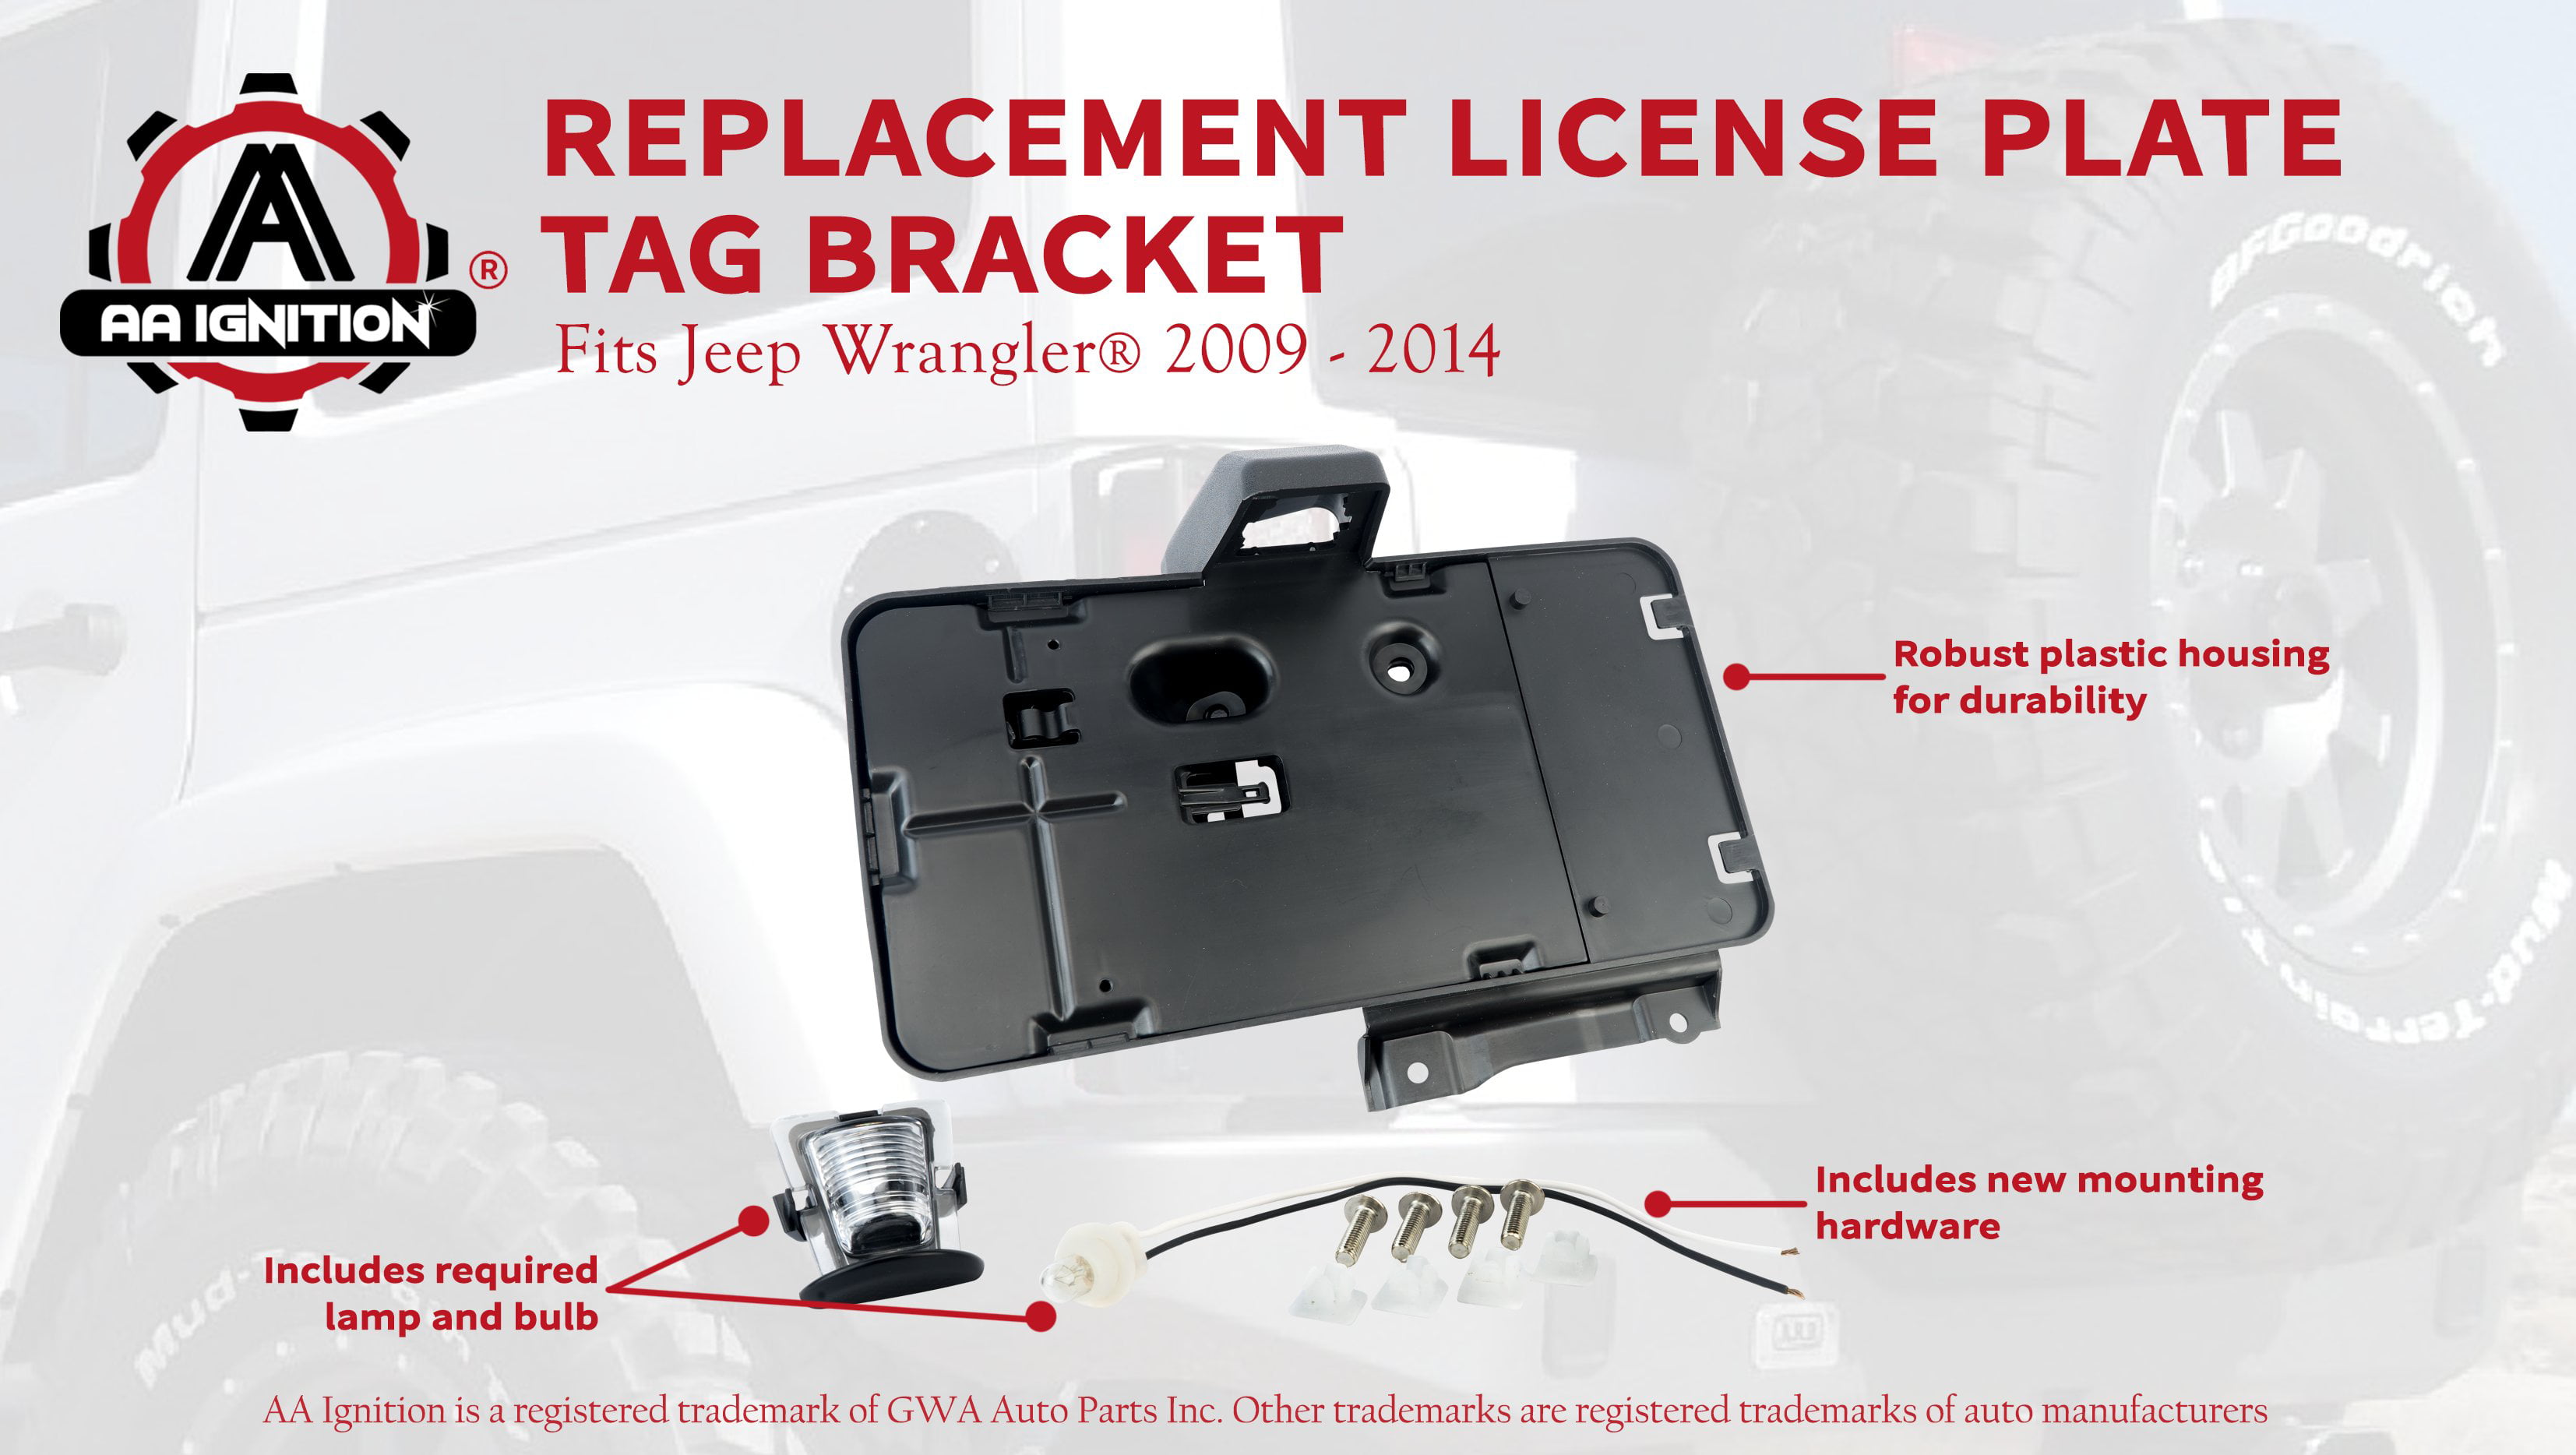 License Plate Tag Bracket With Light - Replaces# 68064720AA - For Jeep  Wrangler Including Years 2009, 2010, 2011, 2012, 2013, 2014 - Rear Plate  Holder Frame 